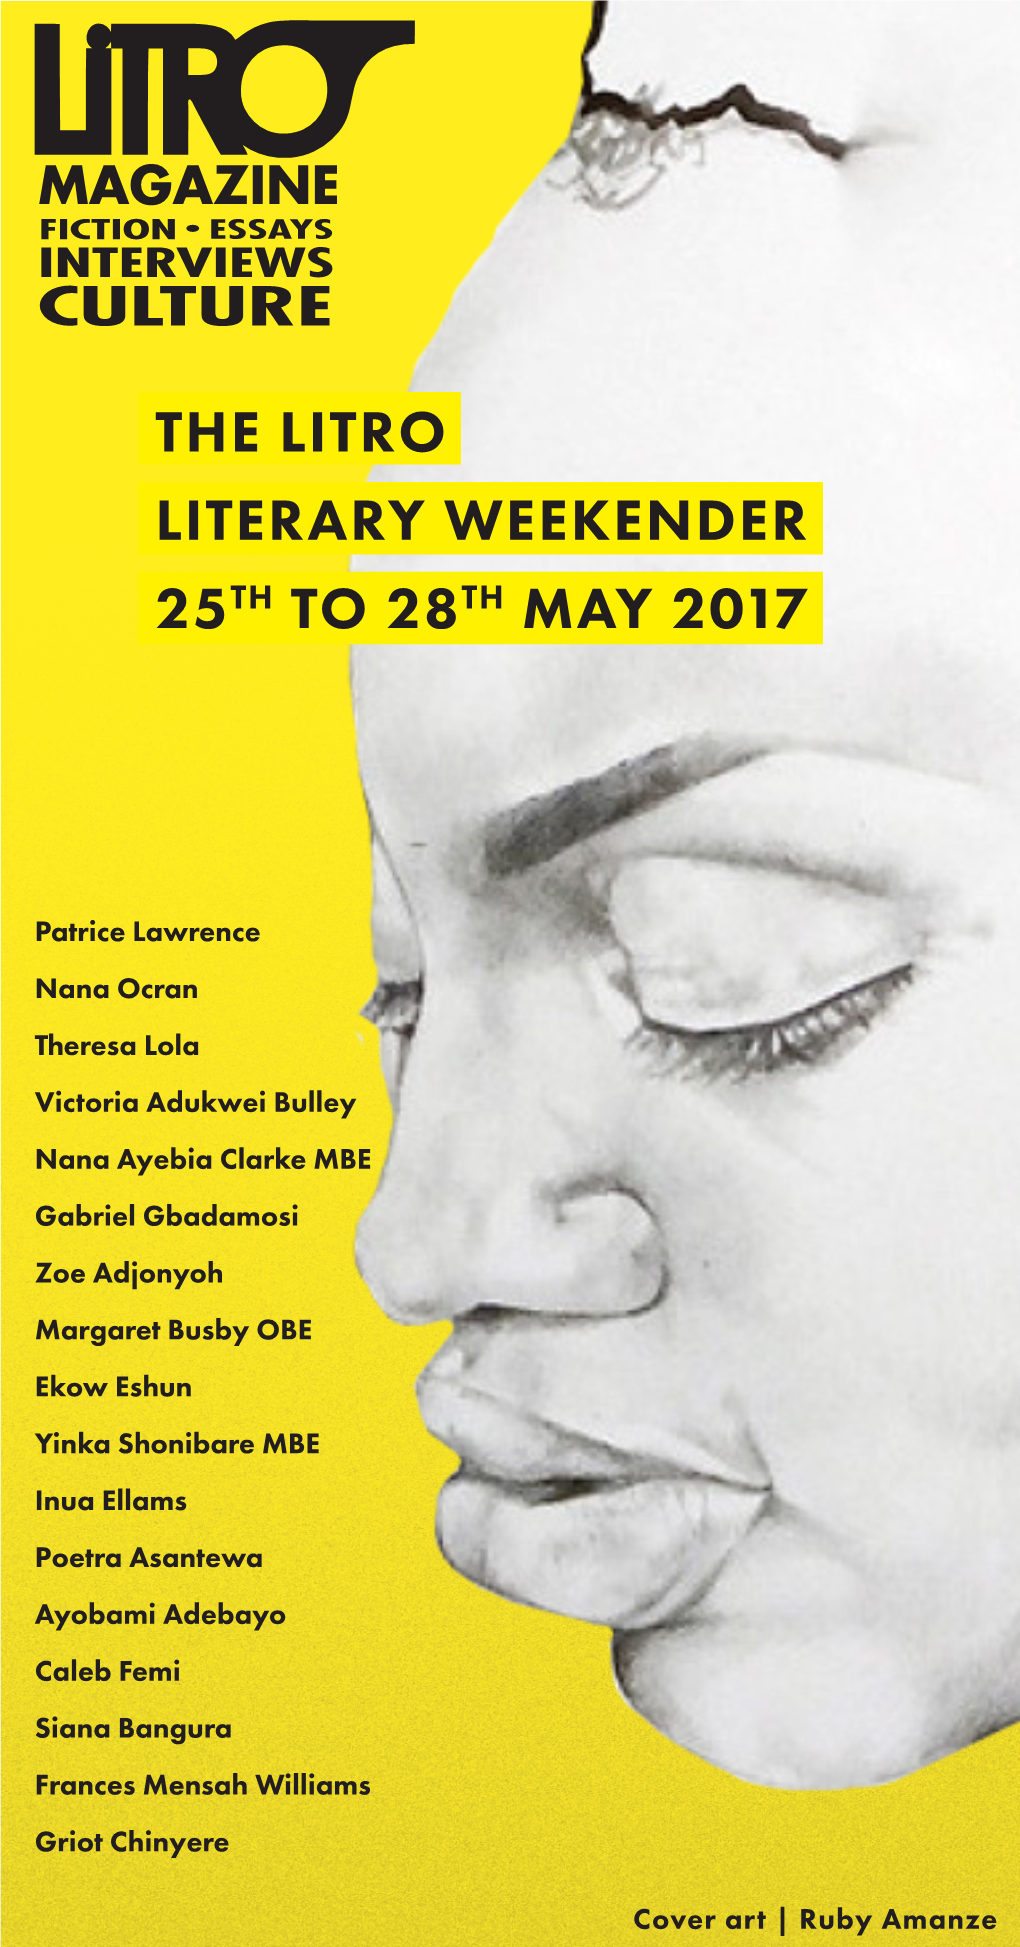 The Litro Literary Weekender 25Th to 28Th M Ay 2017